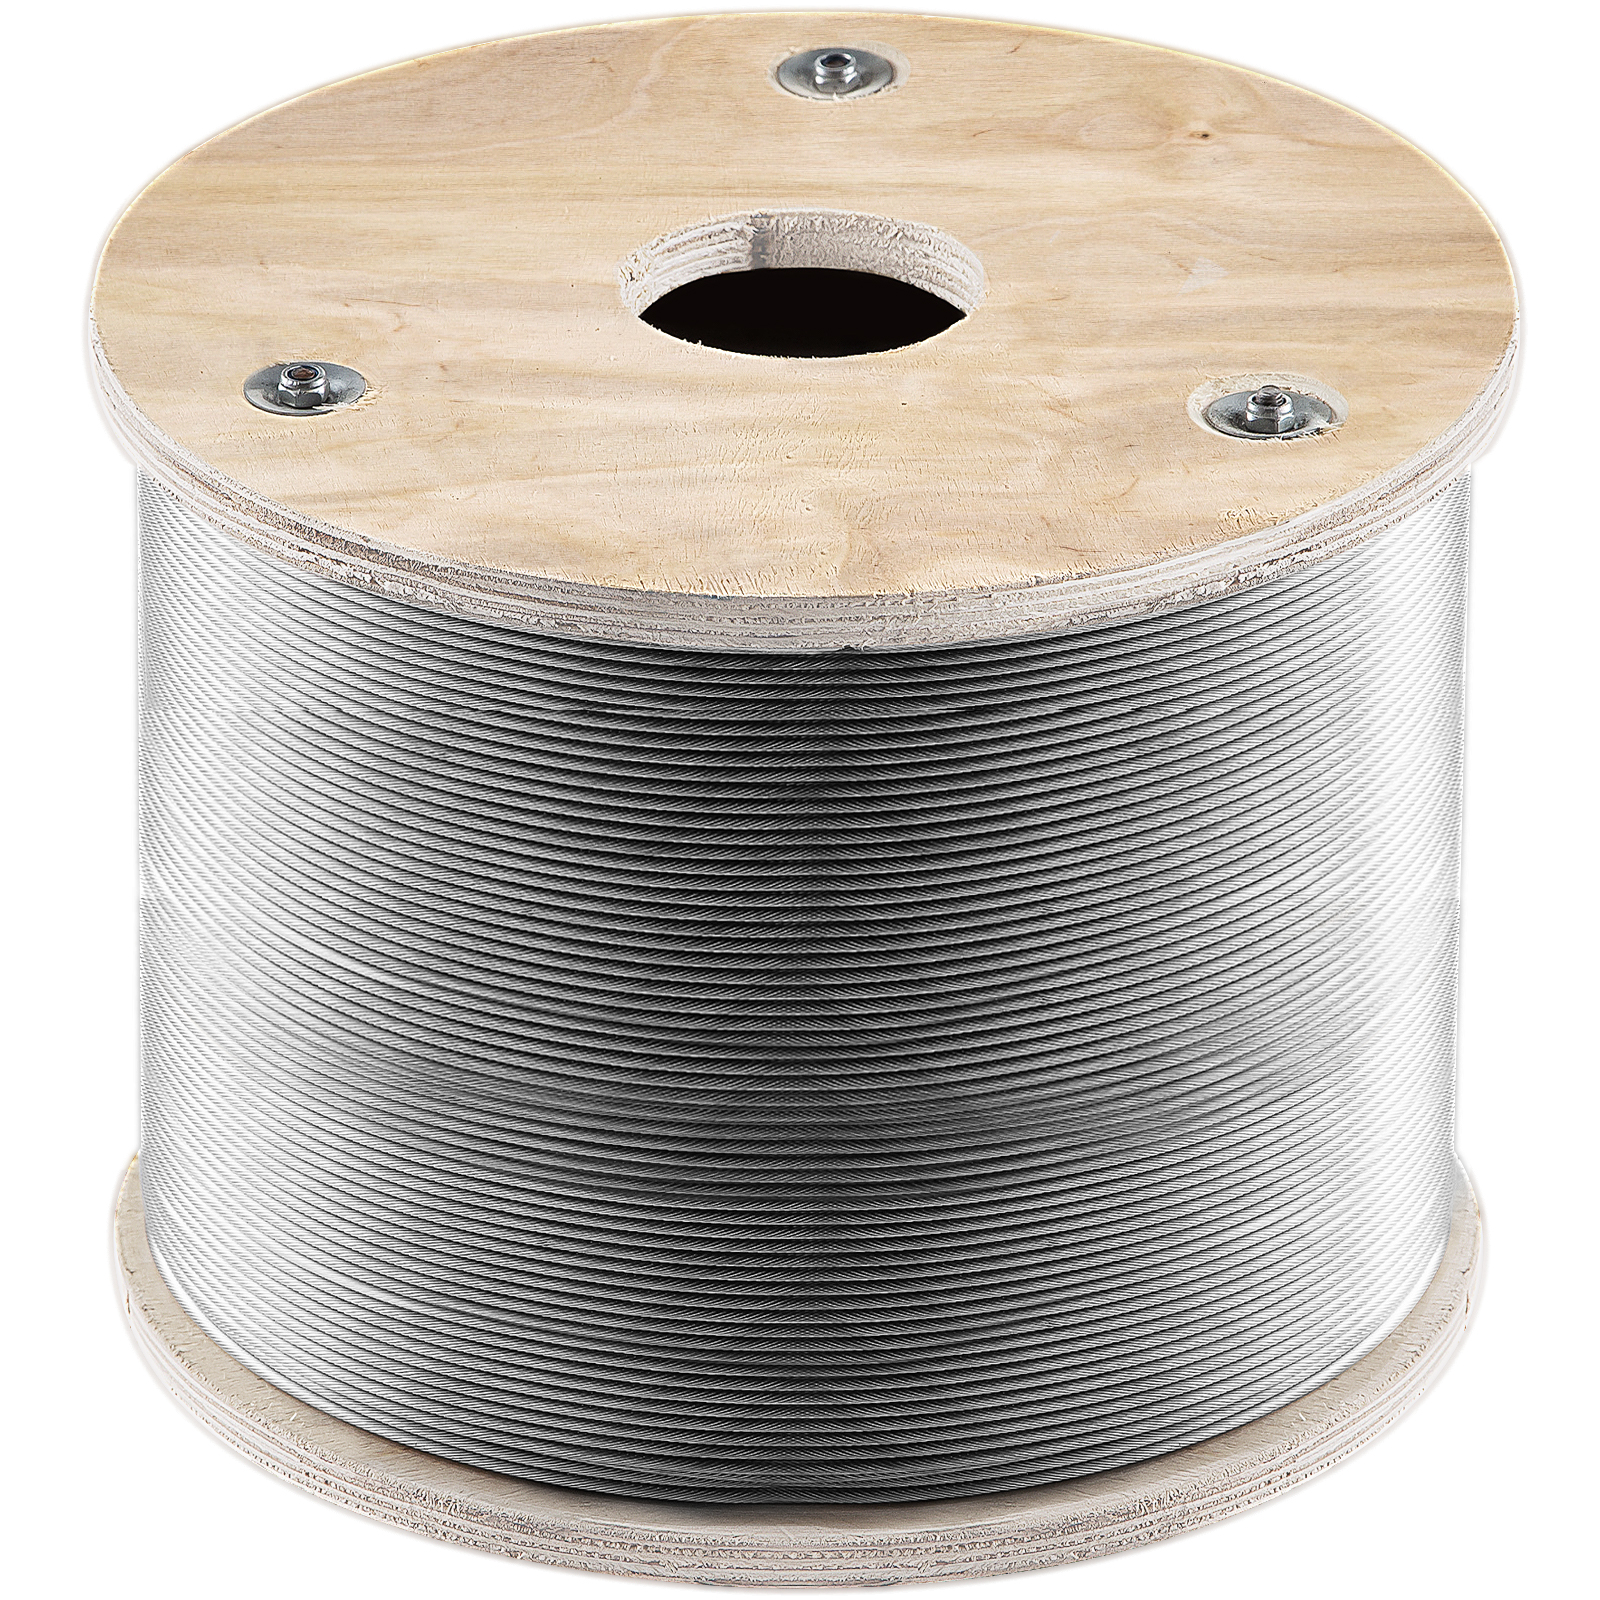 VEVOR 316 Stainless Steel Wire Rope, 1/8in Steel Wire Cable, 500ft